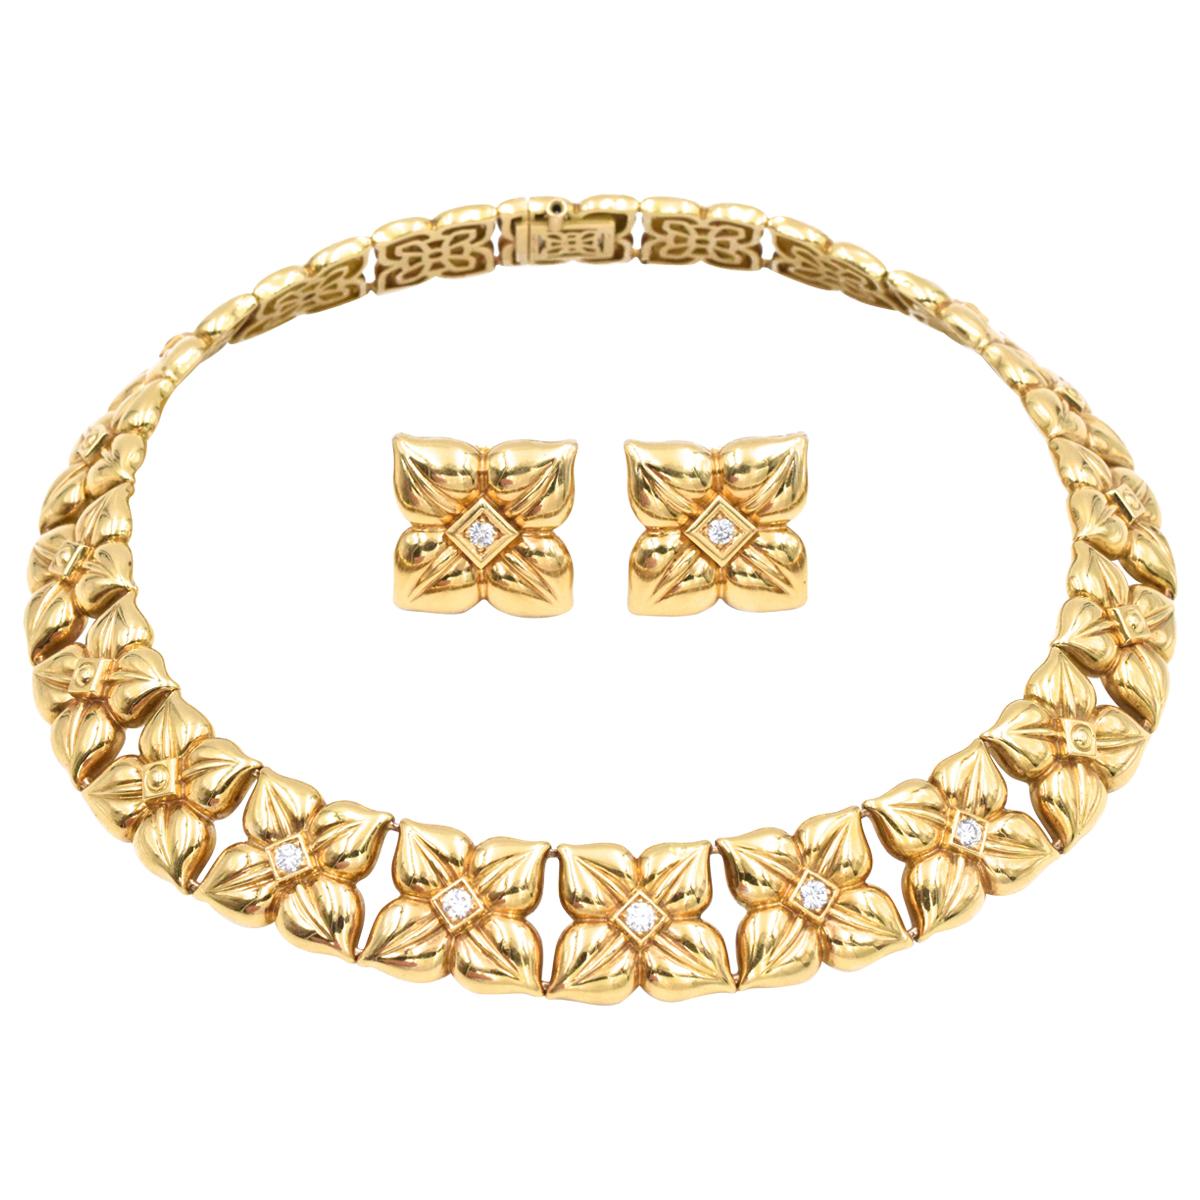 French, Van Cleef & Arpels Gold and Diamond Necklace and Earrings